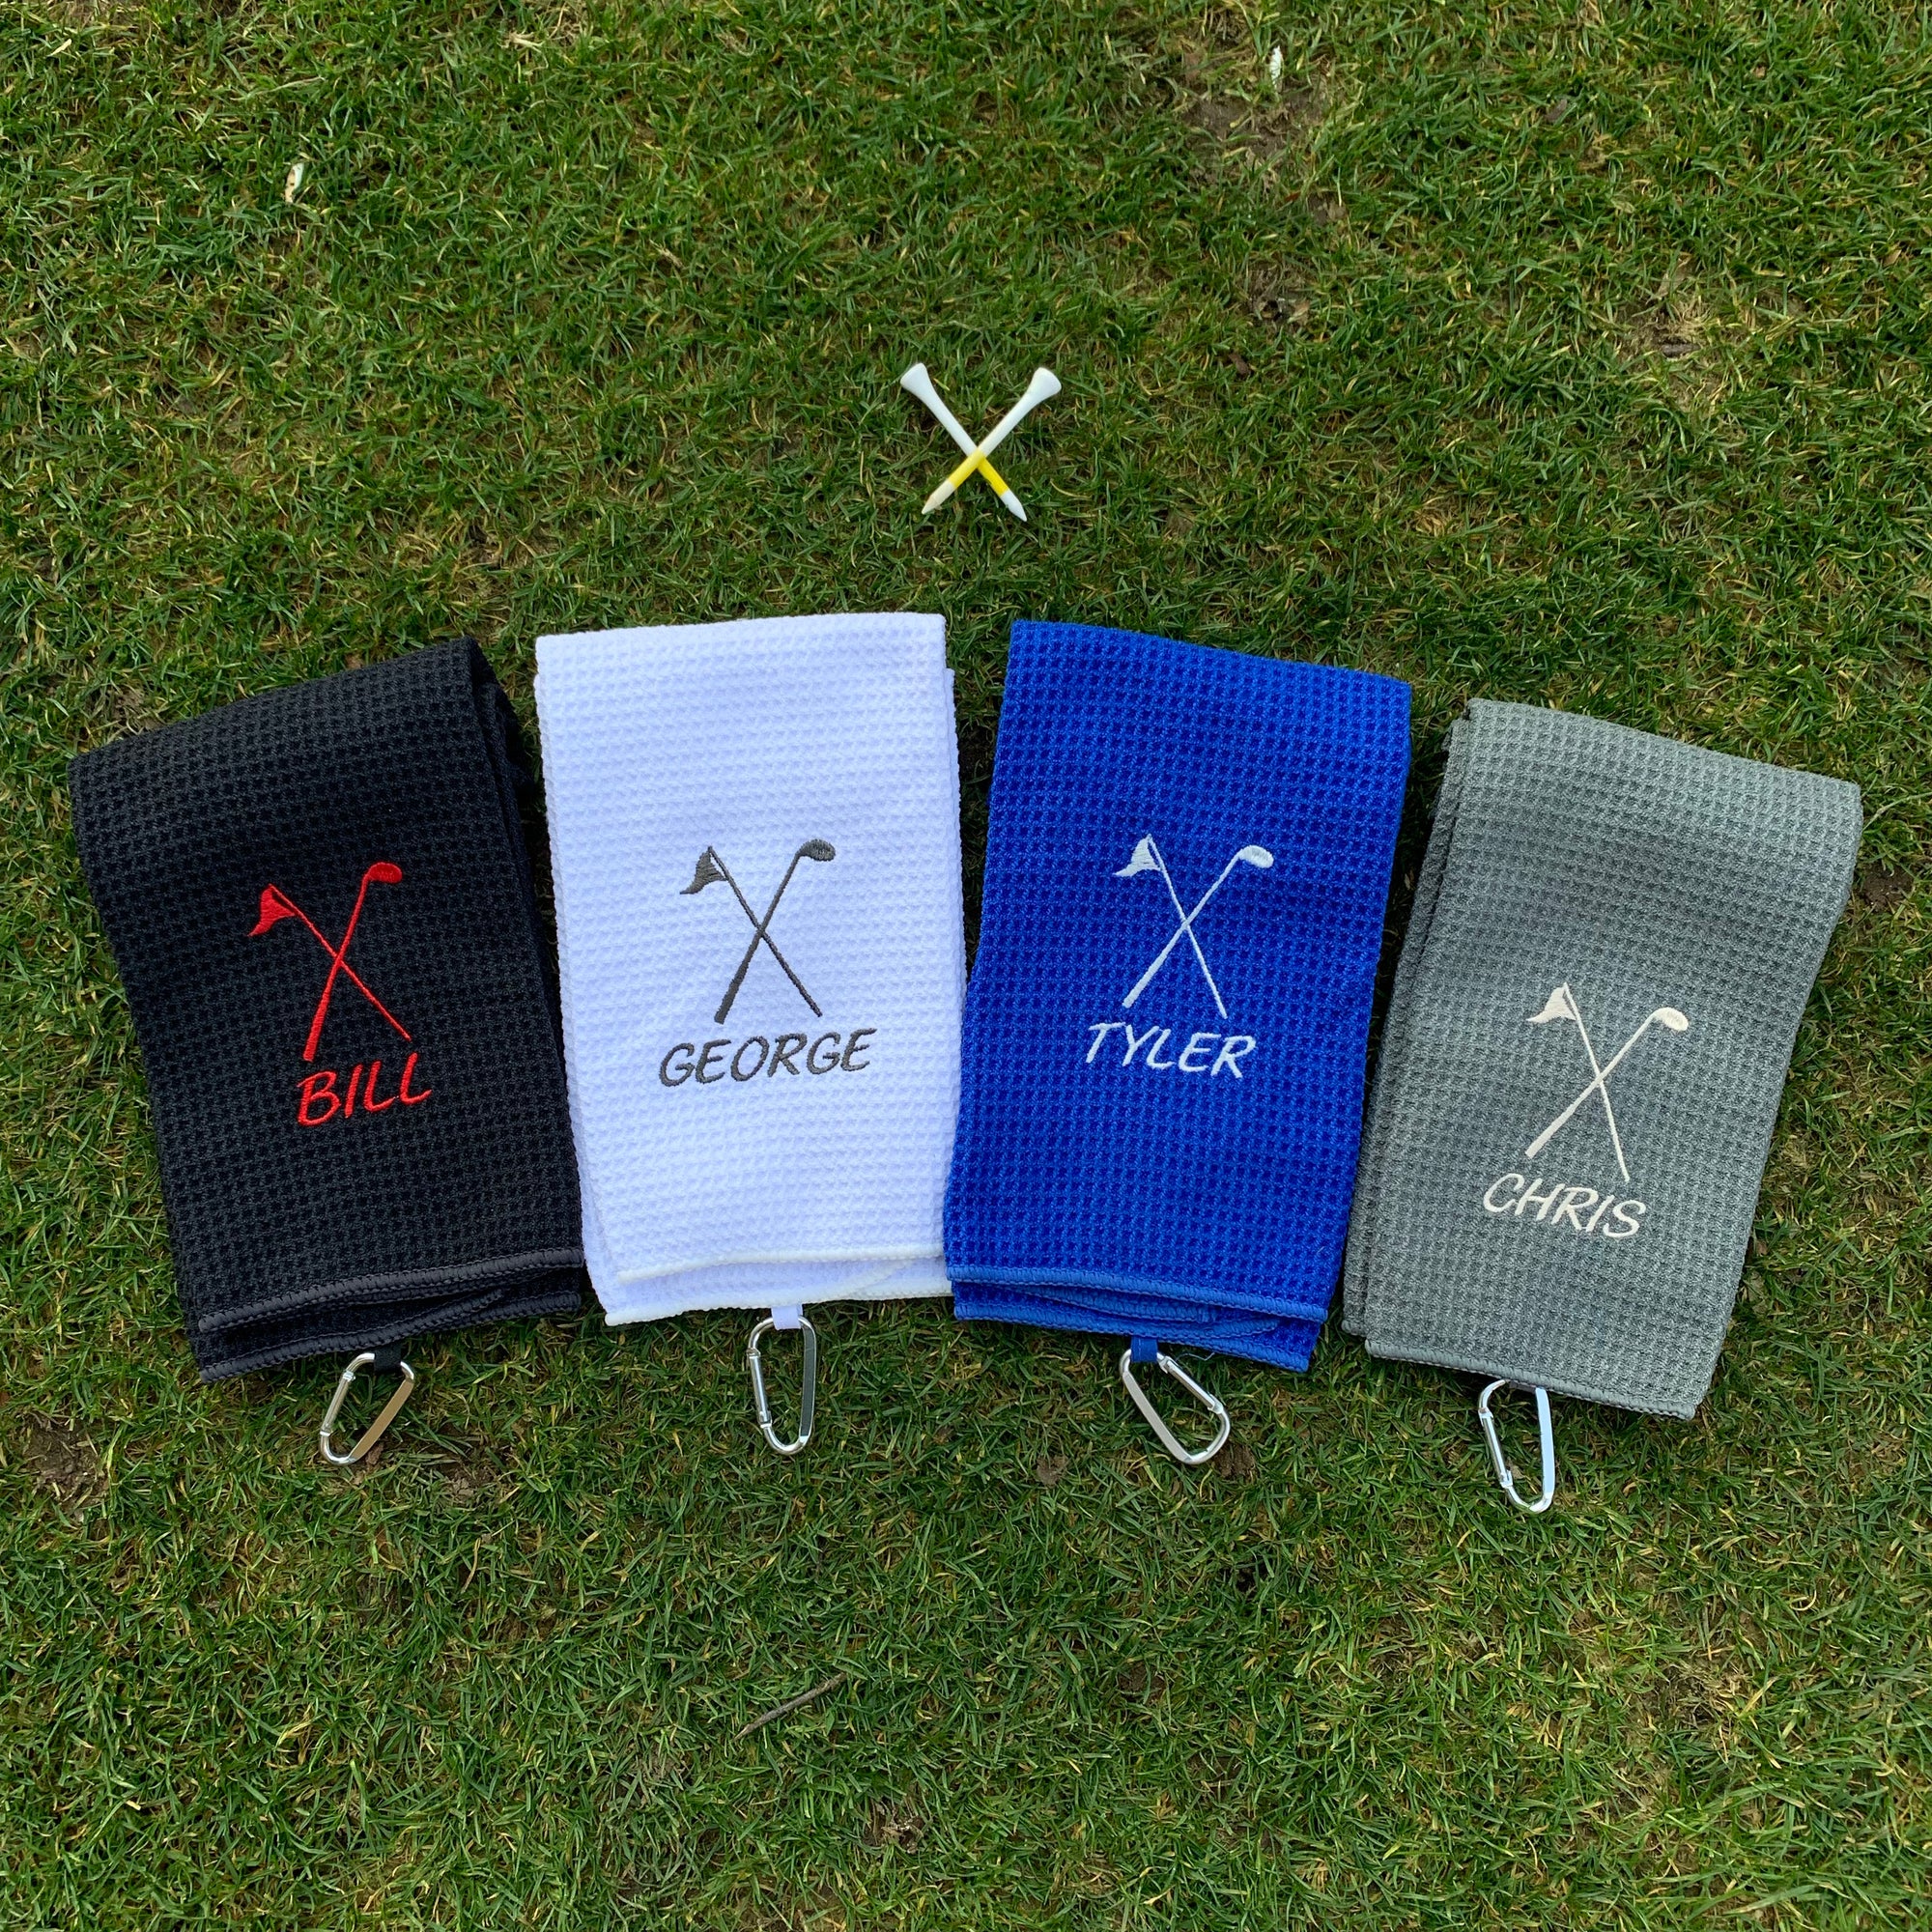 Un-FORE-gettable Golf Towel